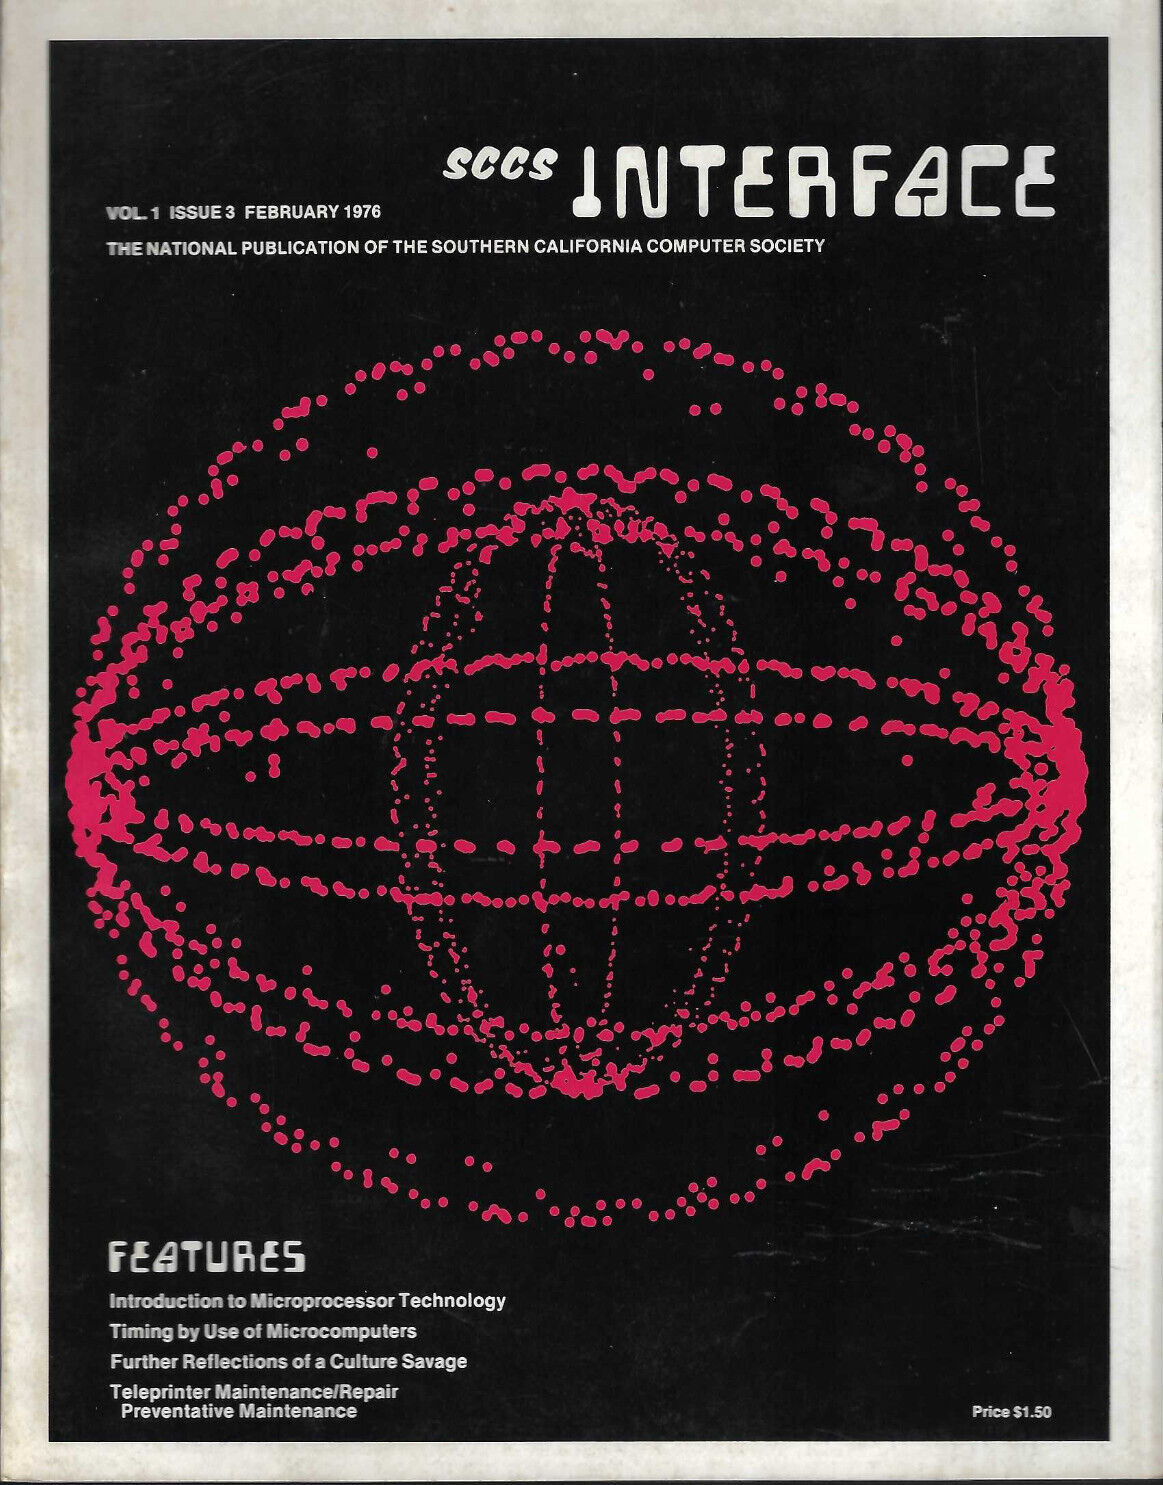 VINTAGE FEB 1976 VOL 1 ISSUE 3 SCCS INTERFACE MAGAZINE/MICROPROCESSOR TECHNOLOGY